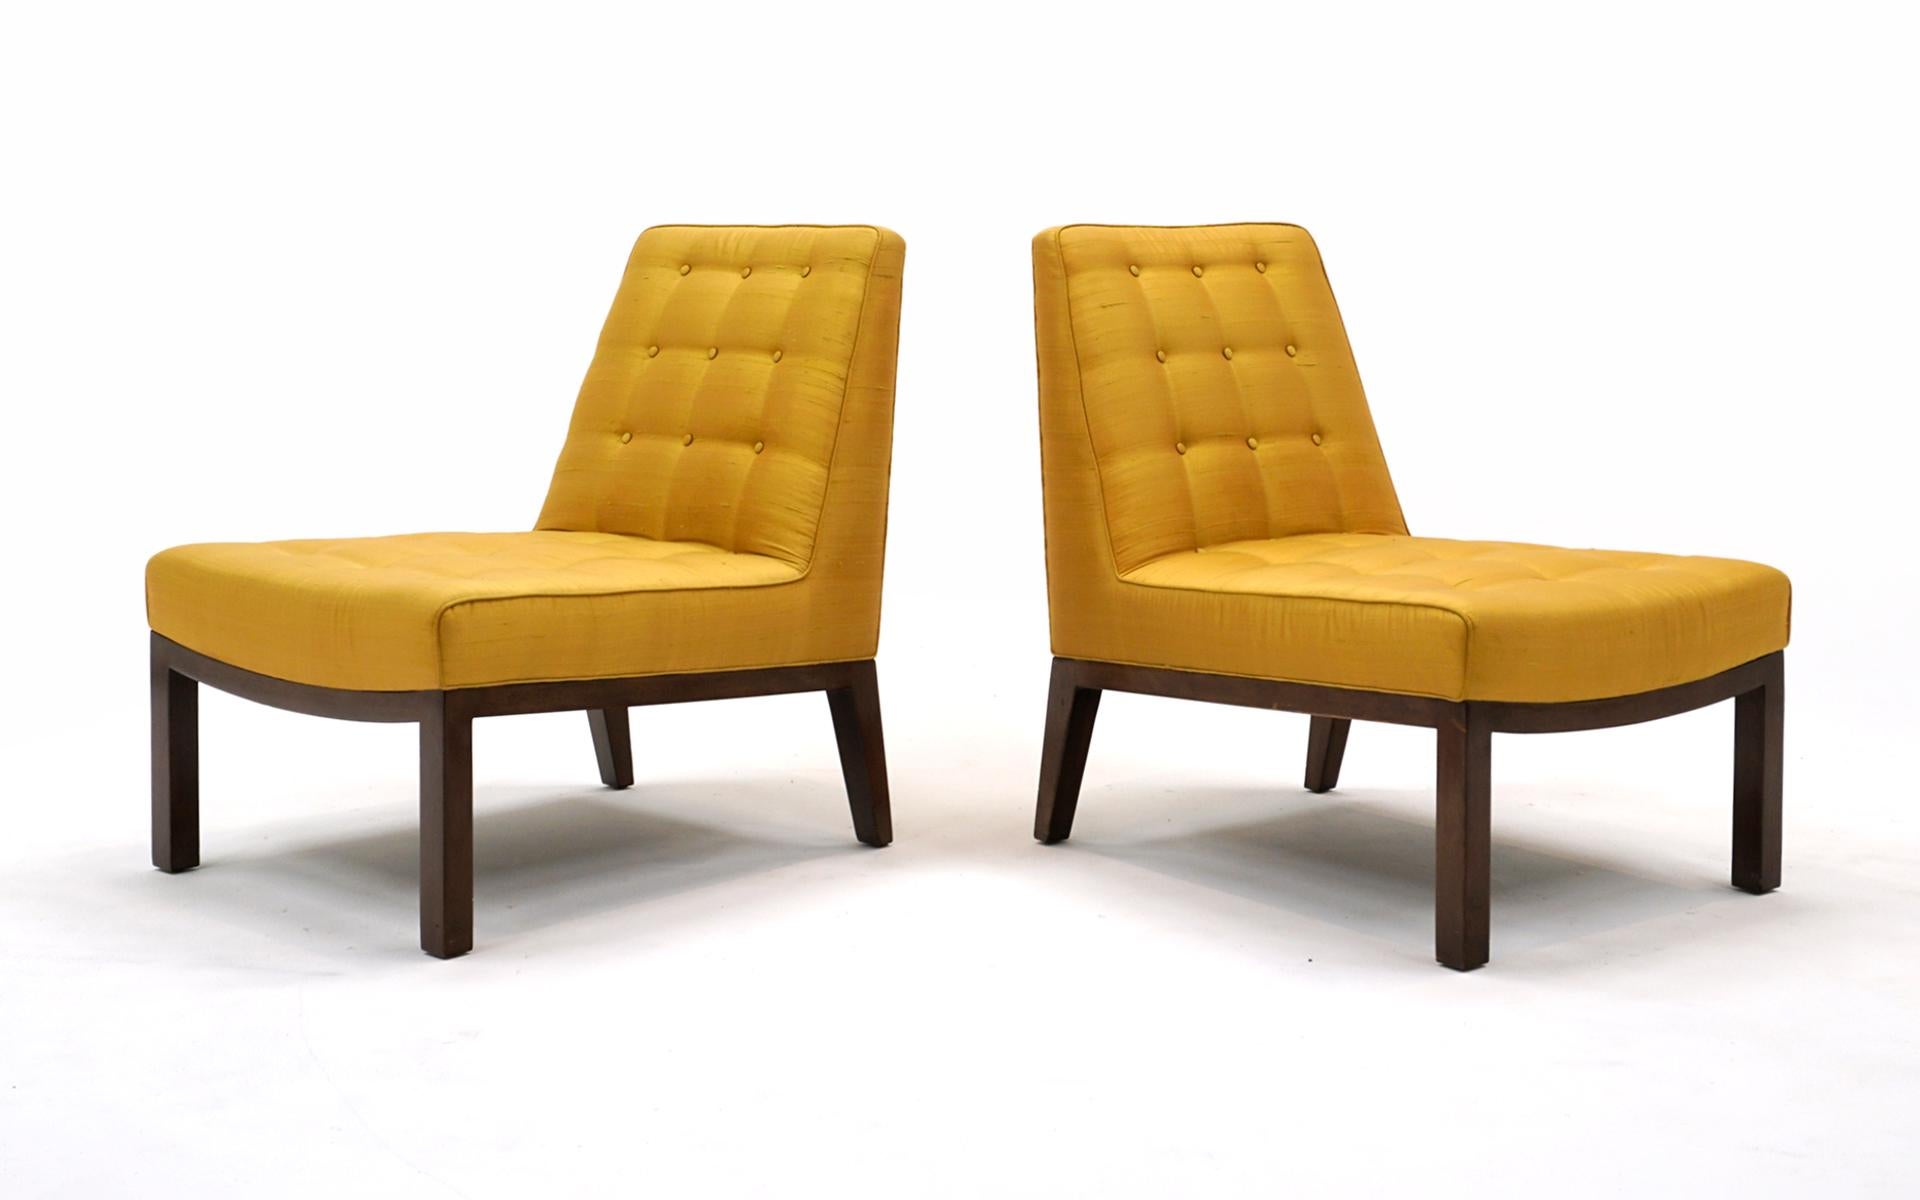 American Pair Slipper Lounge Chairs by Edward Wormley for Dunbar, Original, Signed For Sale